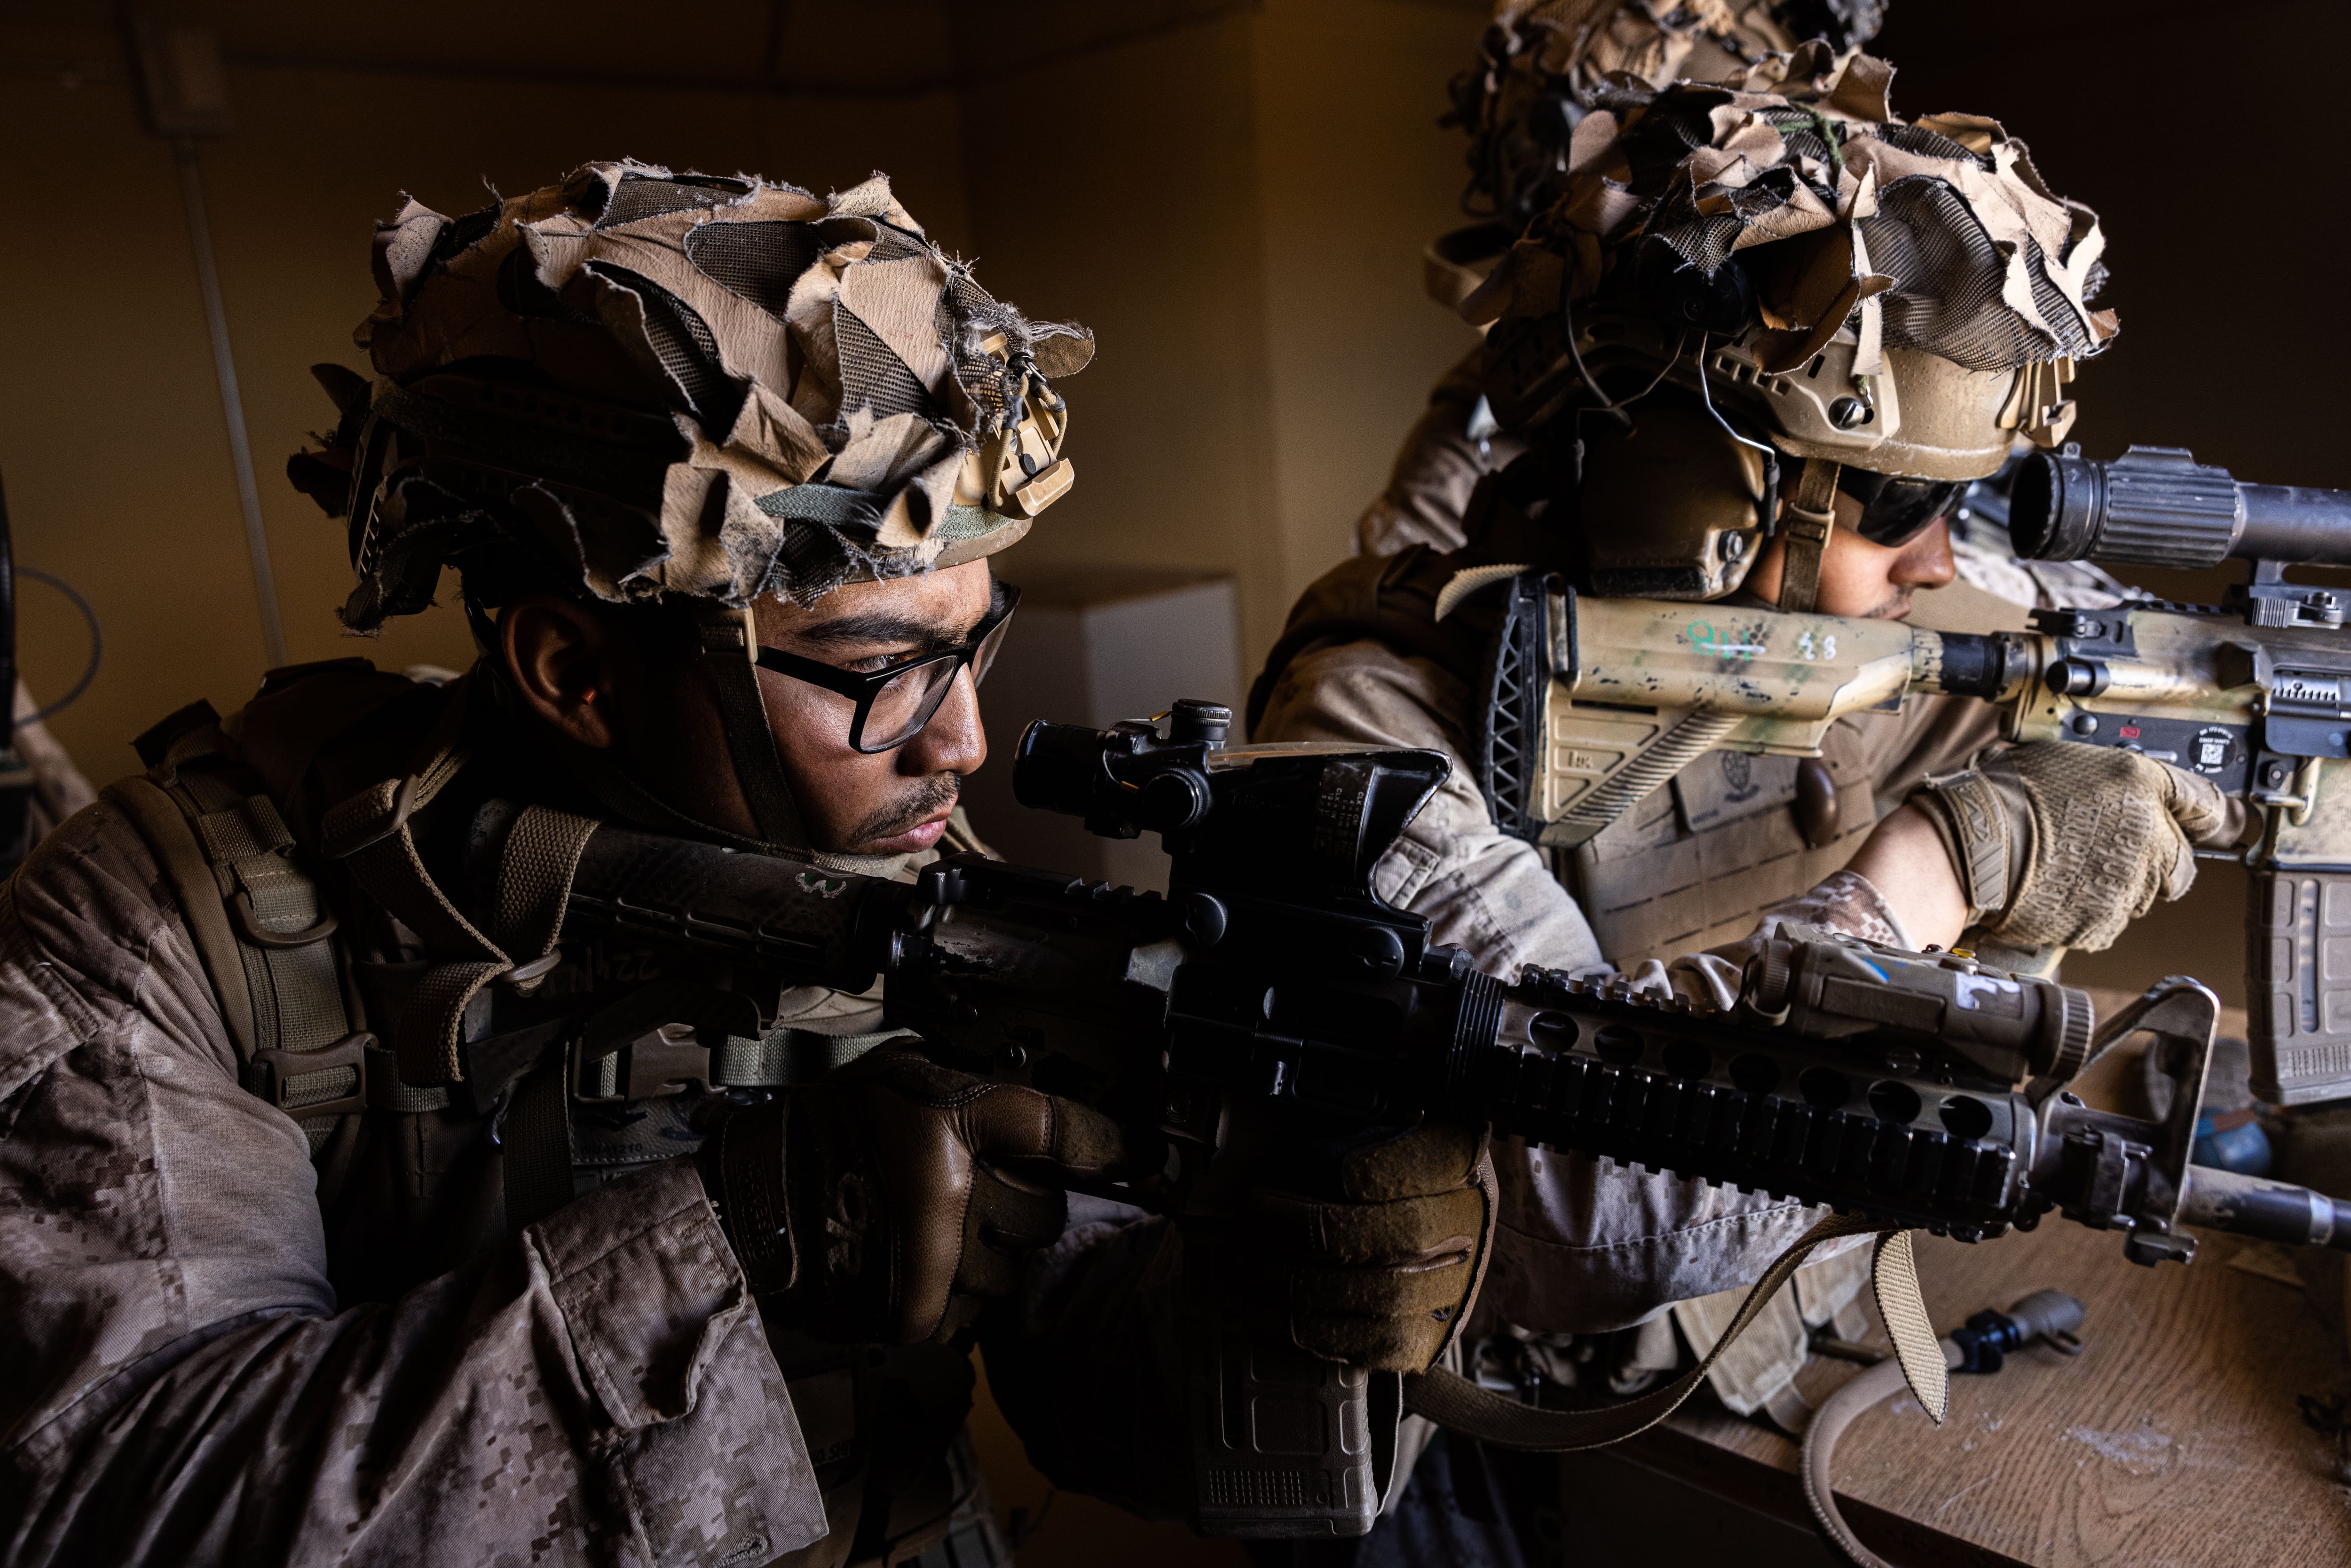 Sniper' Is the Marine Spec Ops Movie Franchise That Just Won't